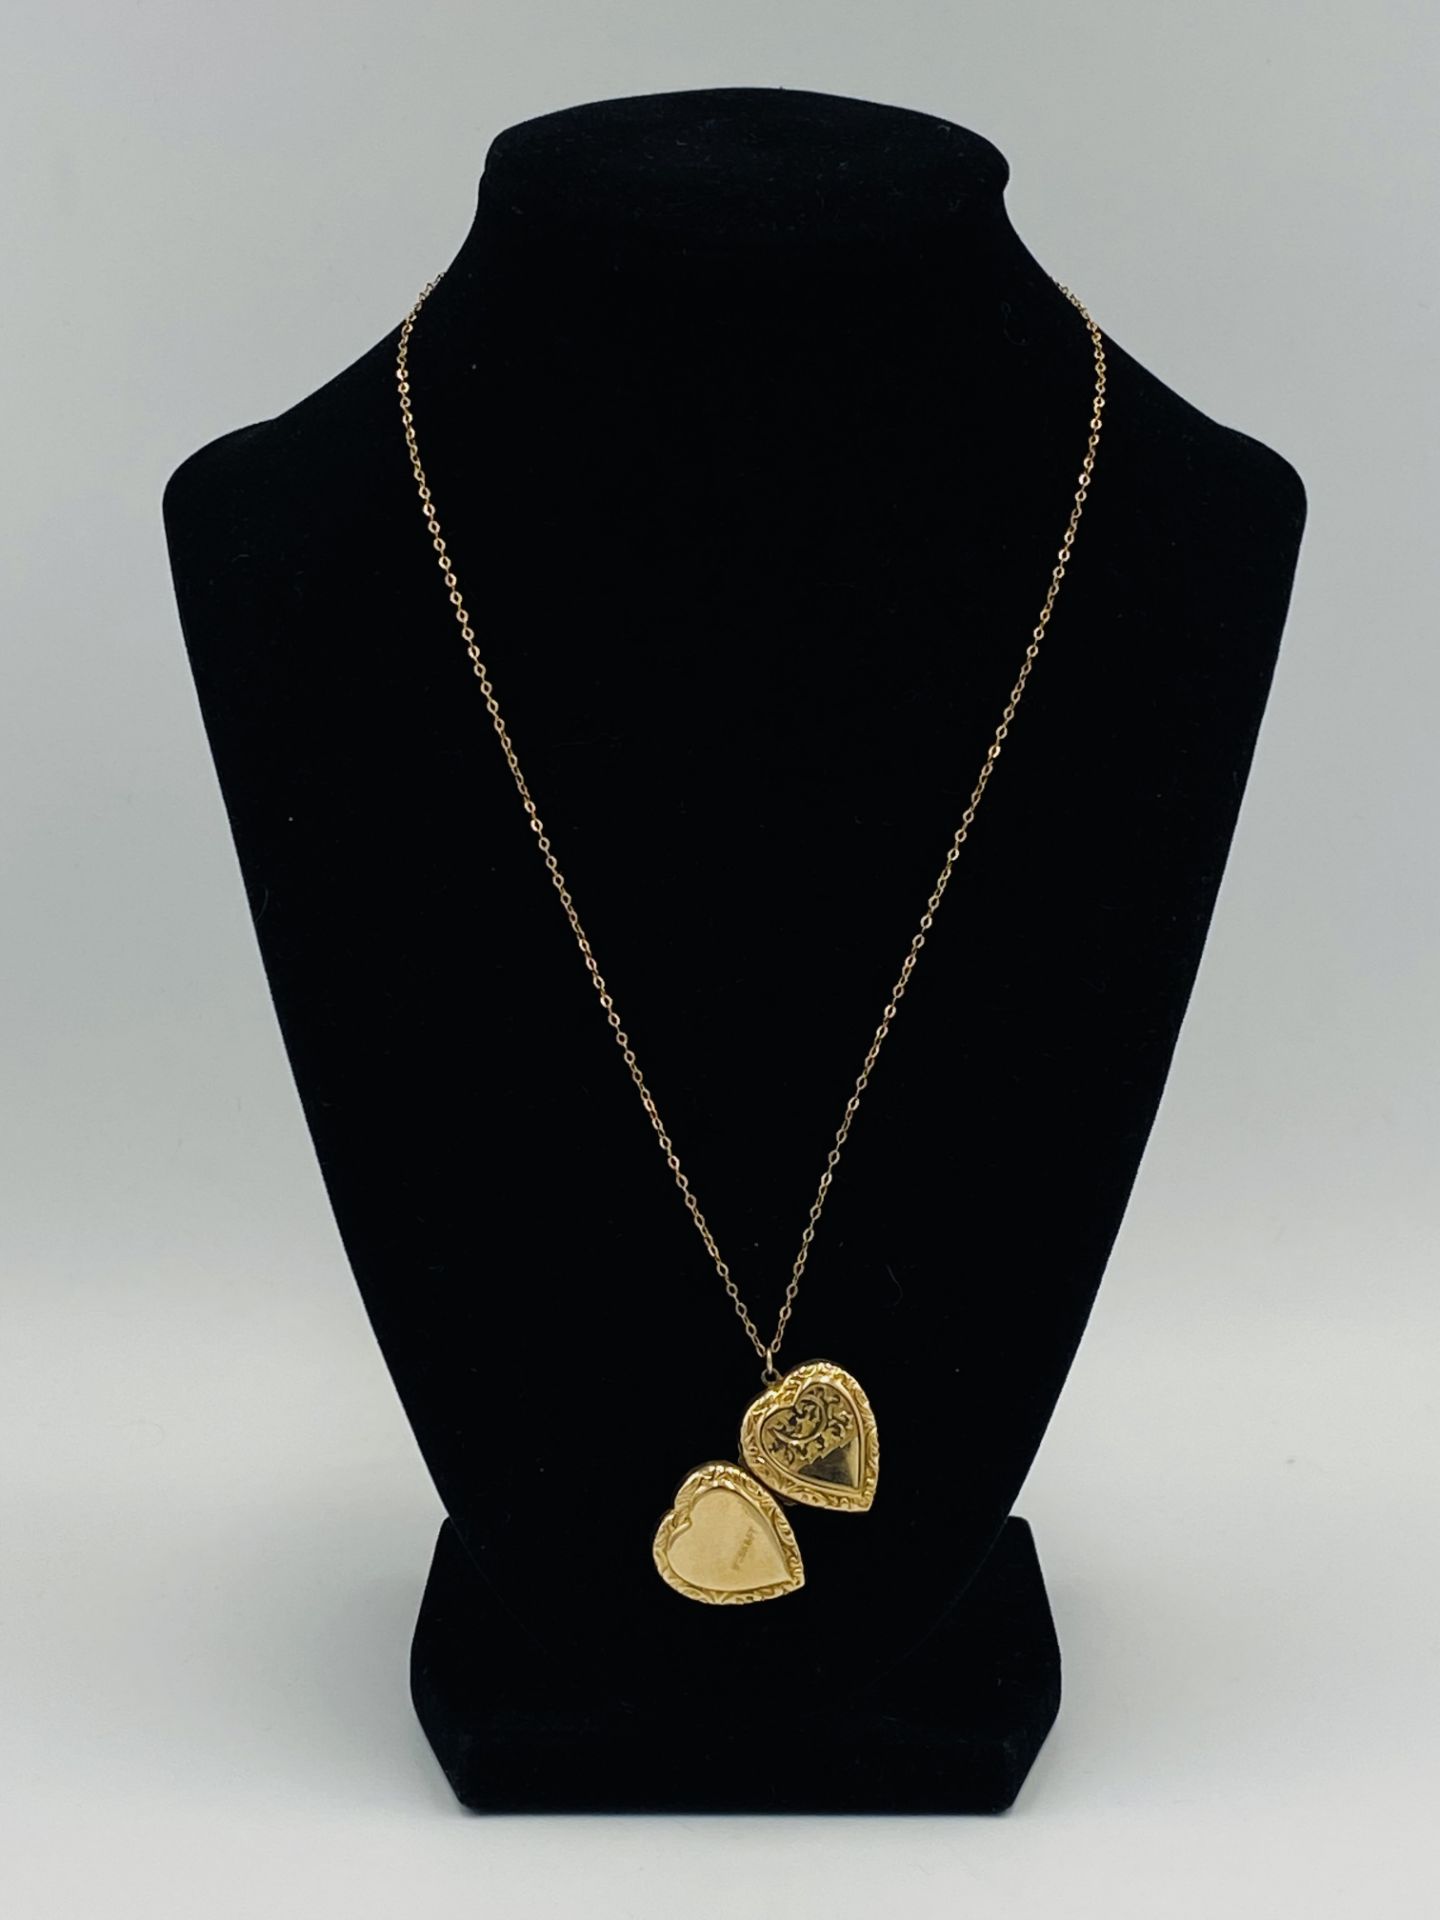 9ct gold heart shaped locket on a 9ct gold chain - Image 2 of 4